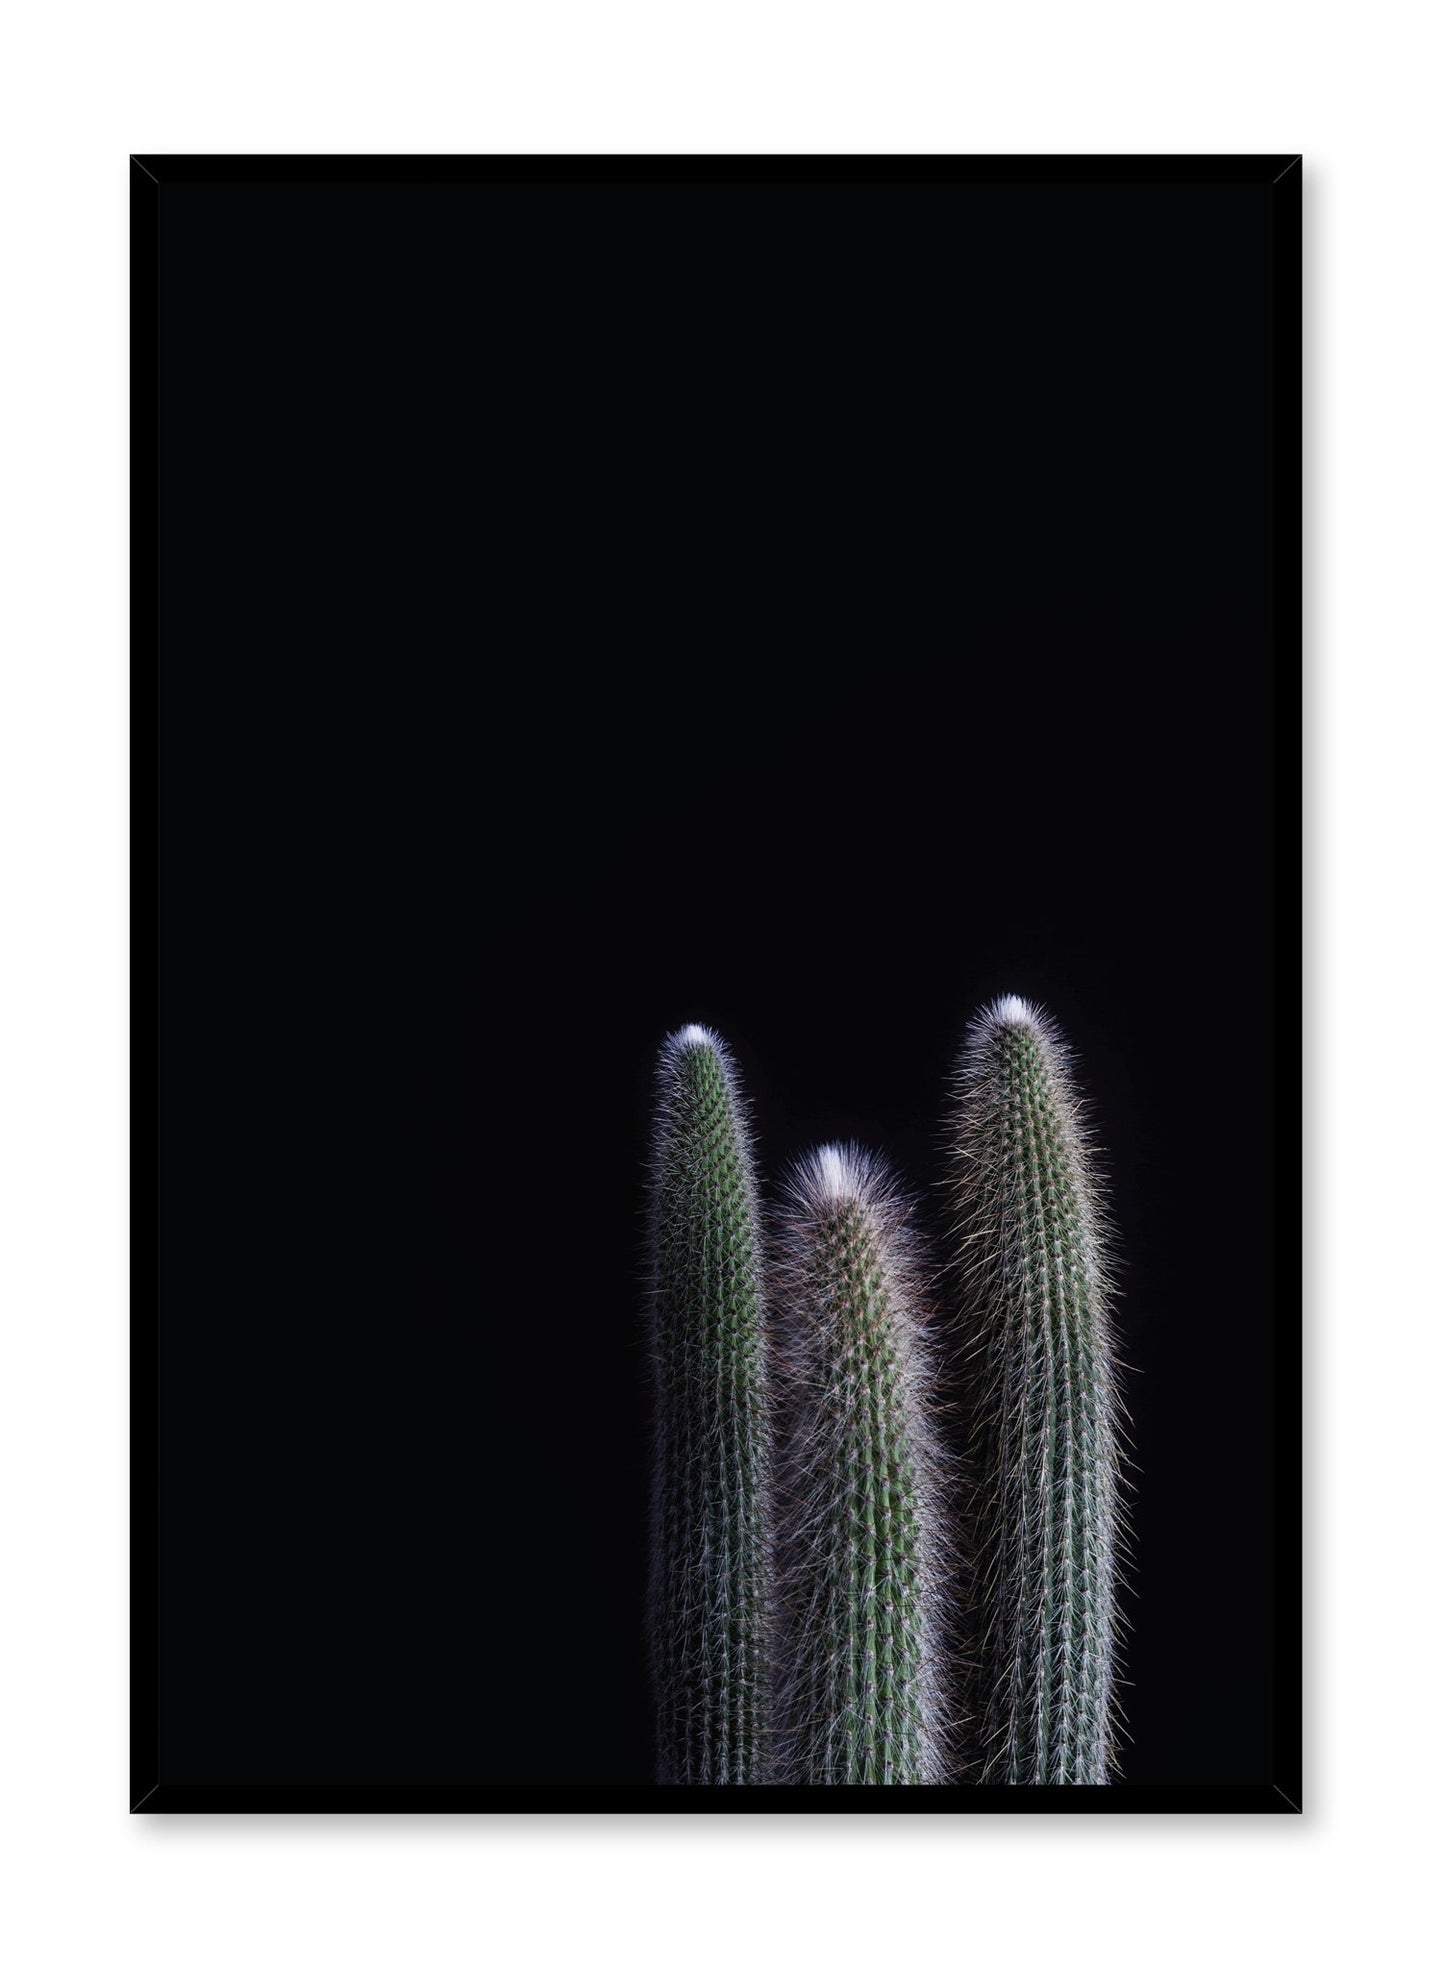 minimalist art print by Opposite Wall with cool with cactus on black bacground